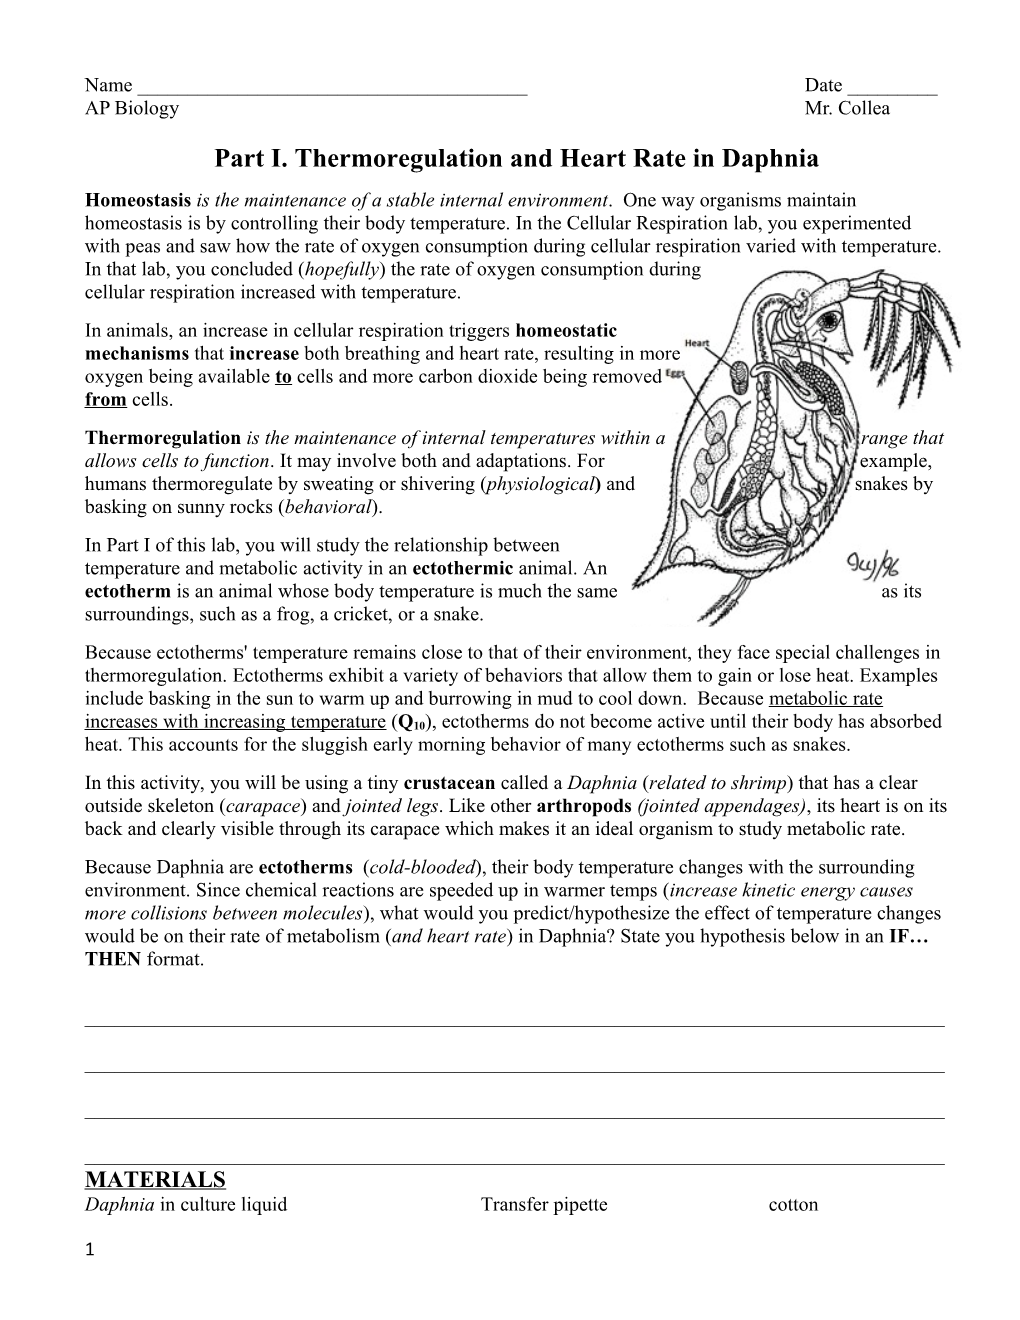 Part I. Thermoregulation and Heart Rate in Daphnia